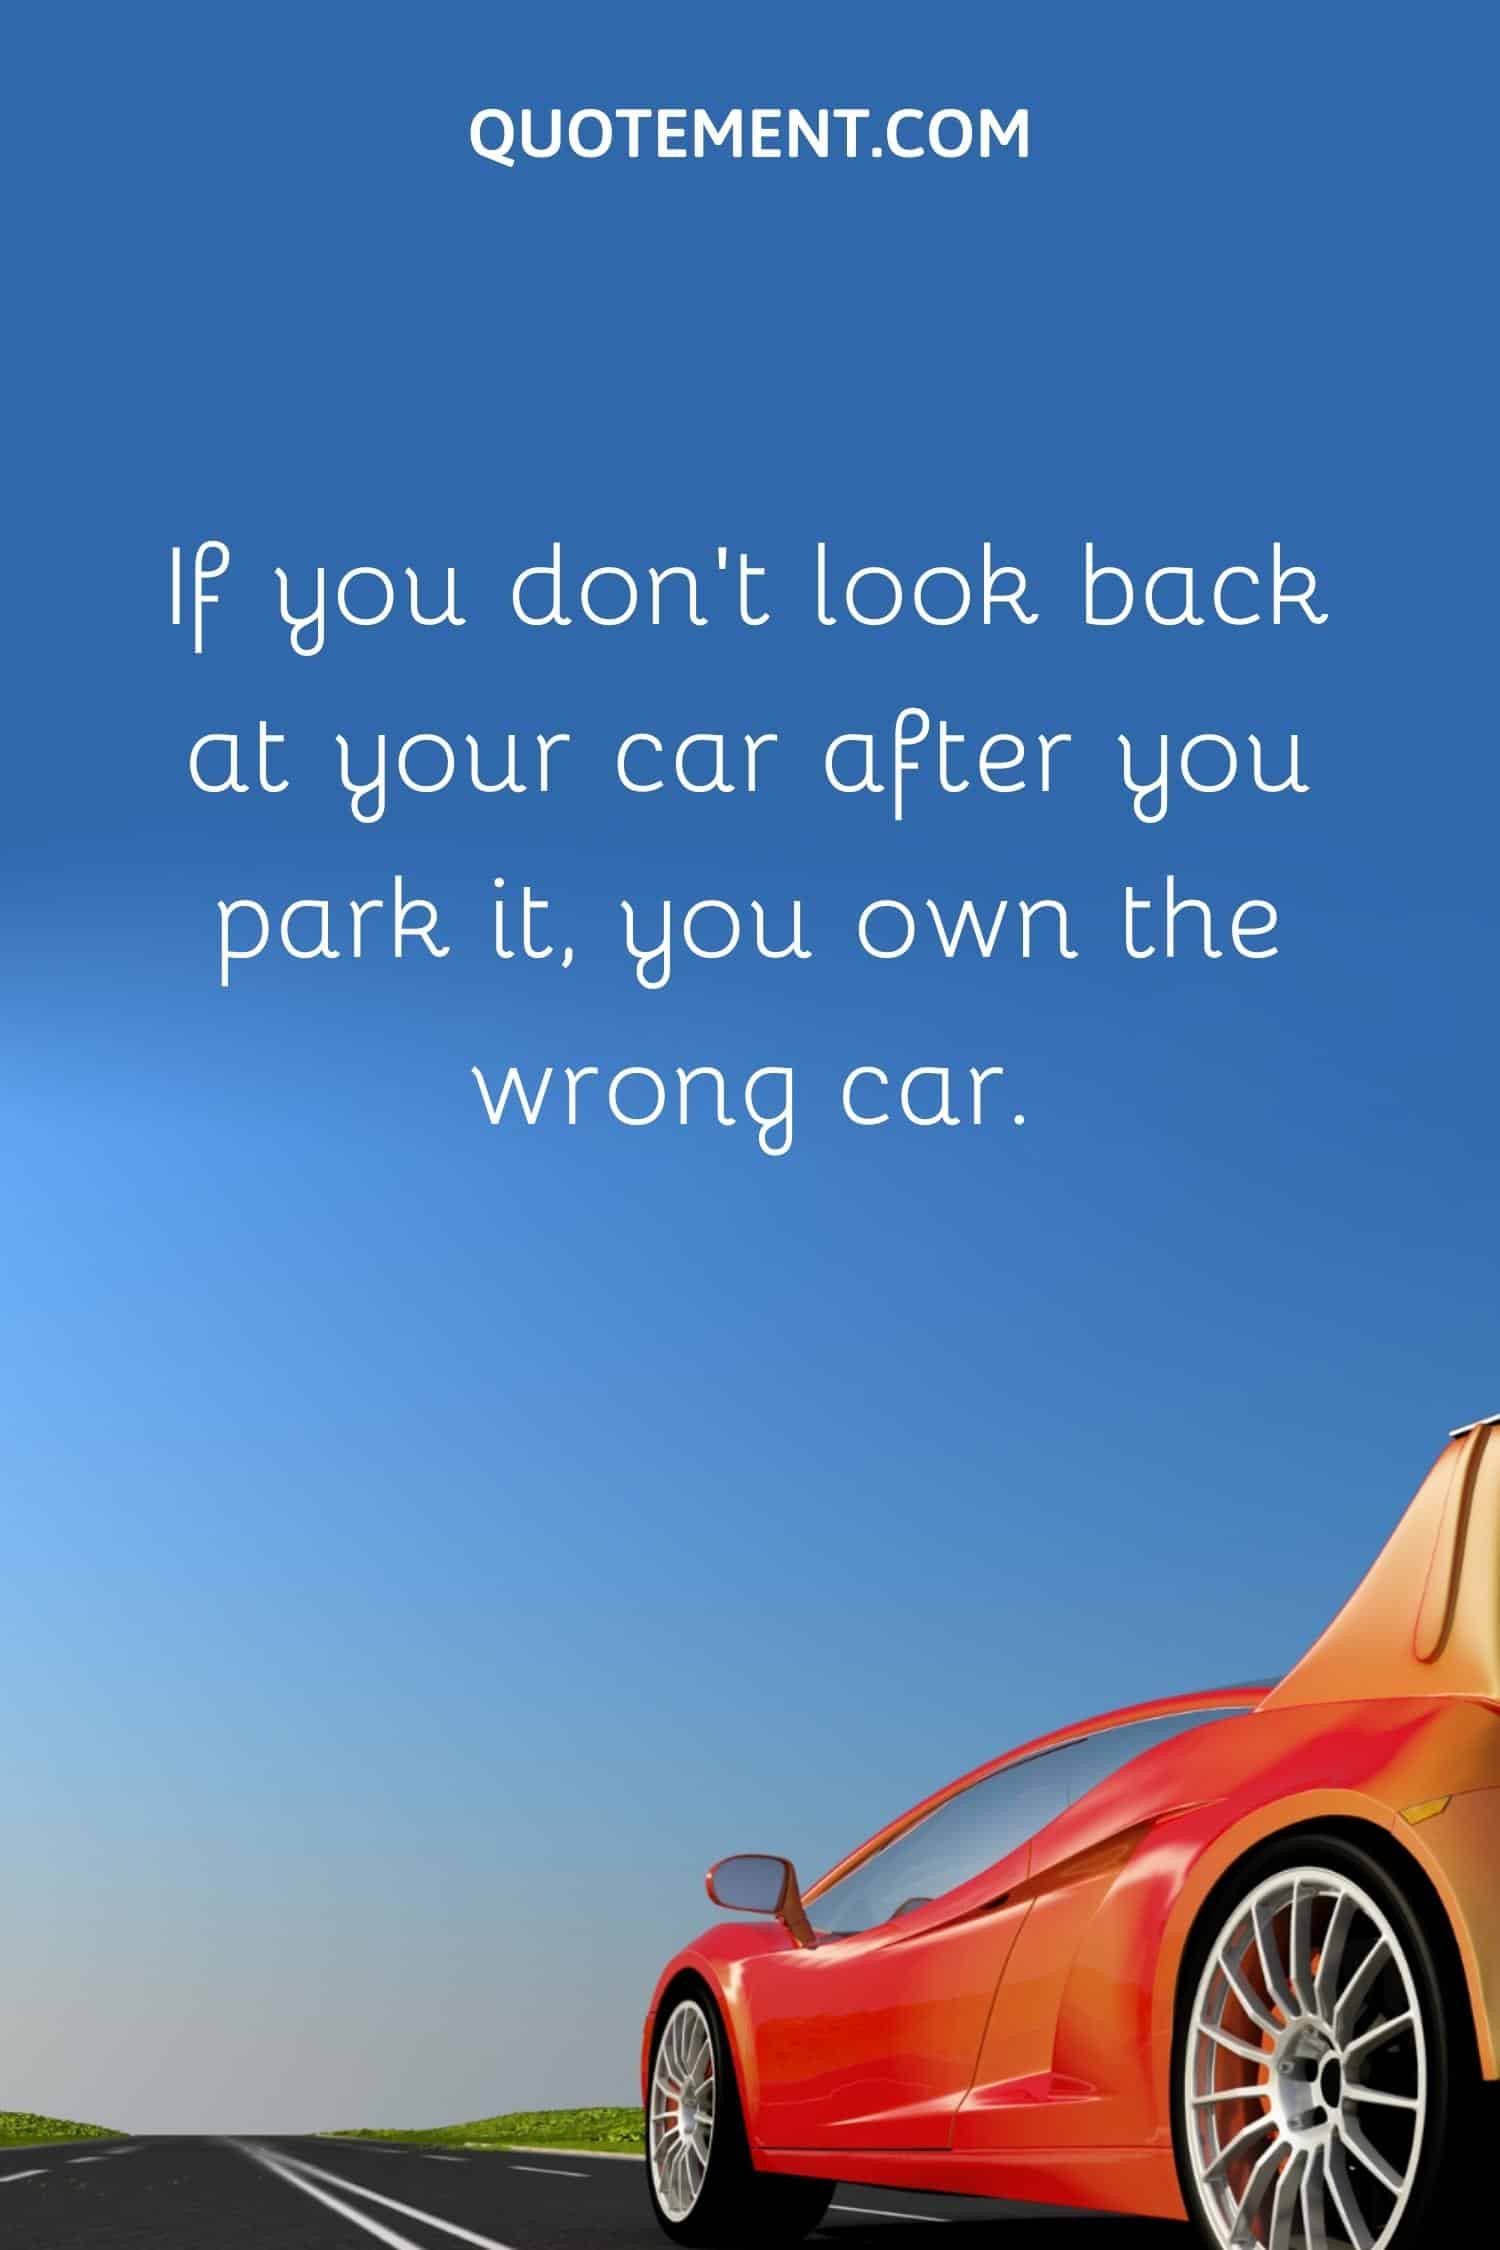 If you don’t look back at your car after you park it, you own the wrong car